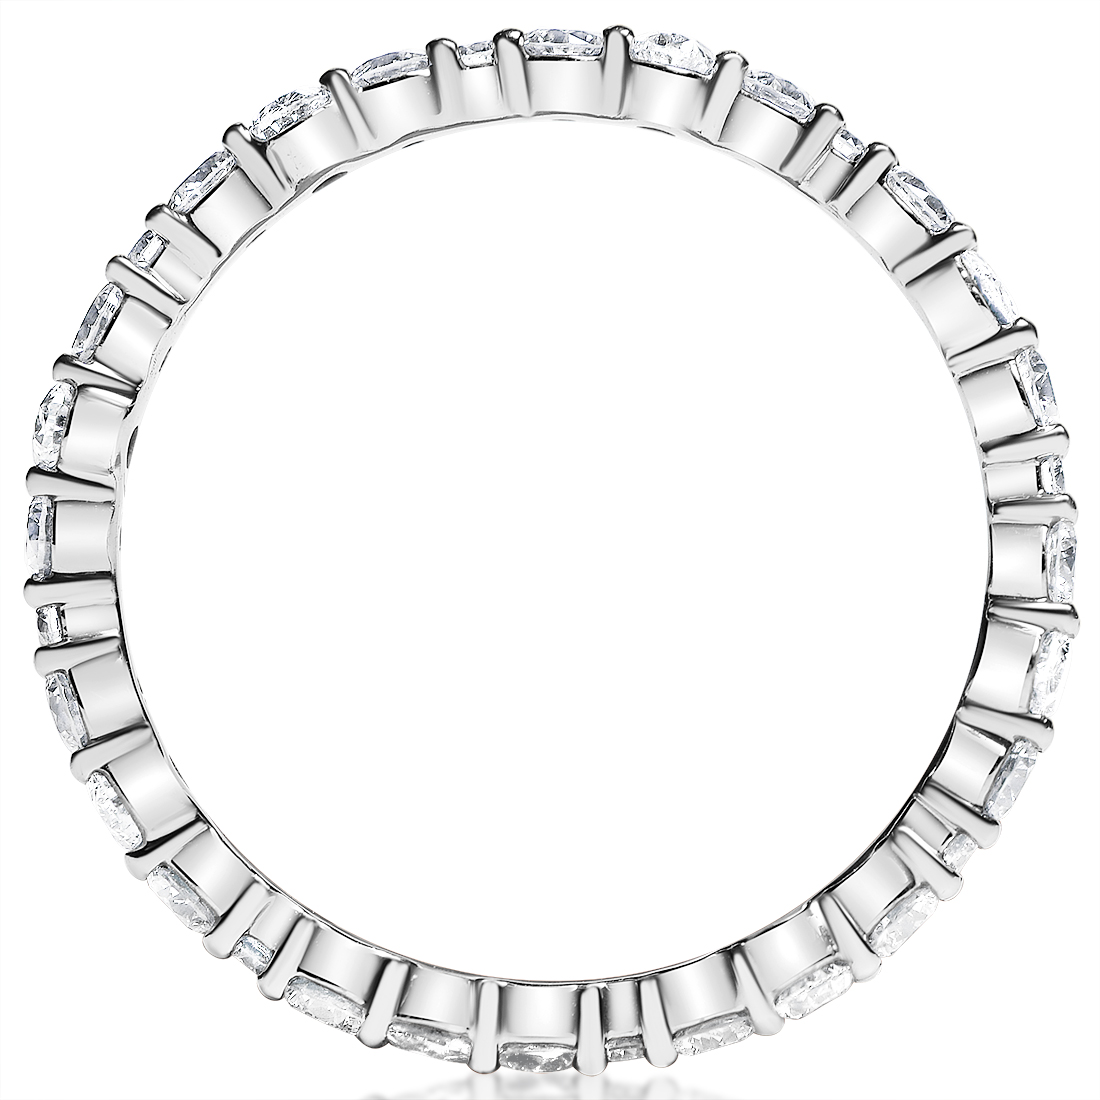 Oval and Round Shared Prong Eternity Band